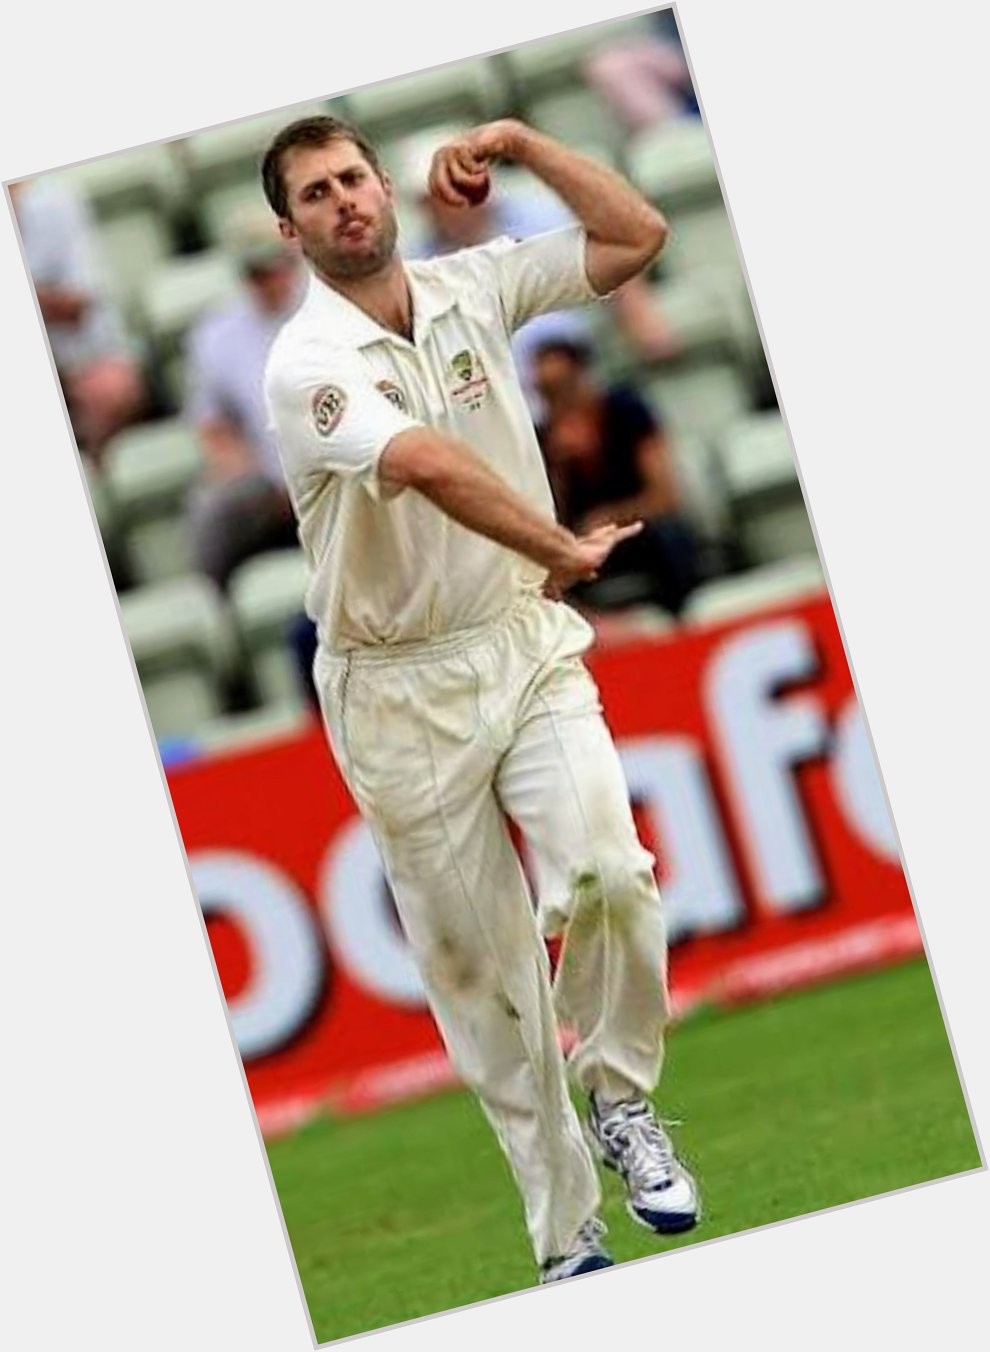 Happy Birthday to a wonderful man, Simon Katich. Have a great day and life ahead. ! 